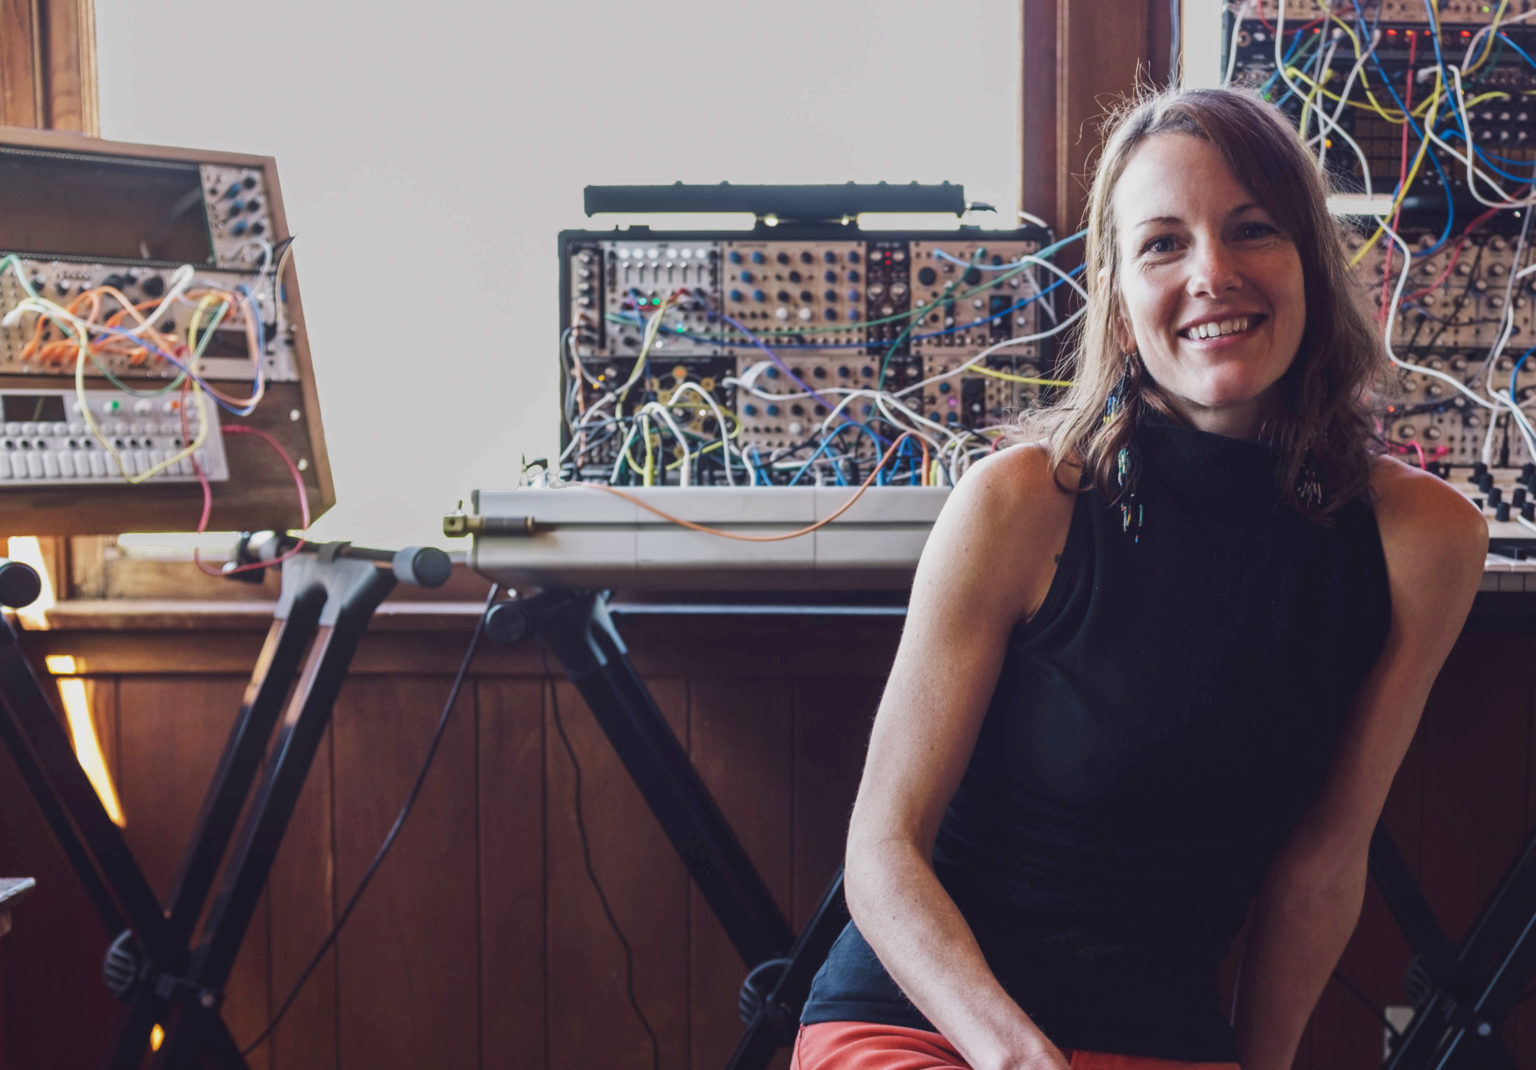 "Expanding Electricity" by Kaitlyn Aurelia Smith is Northern Transmissions Song of the Day